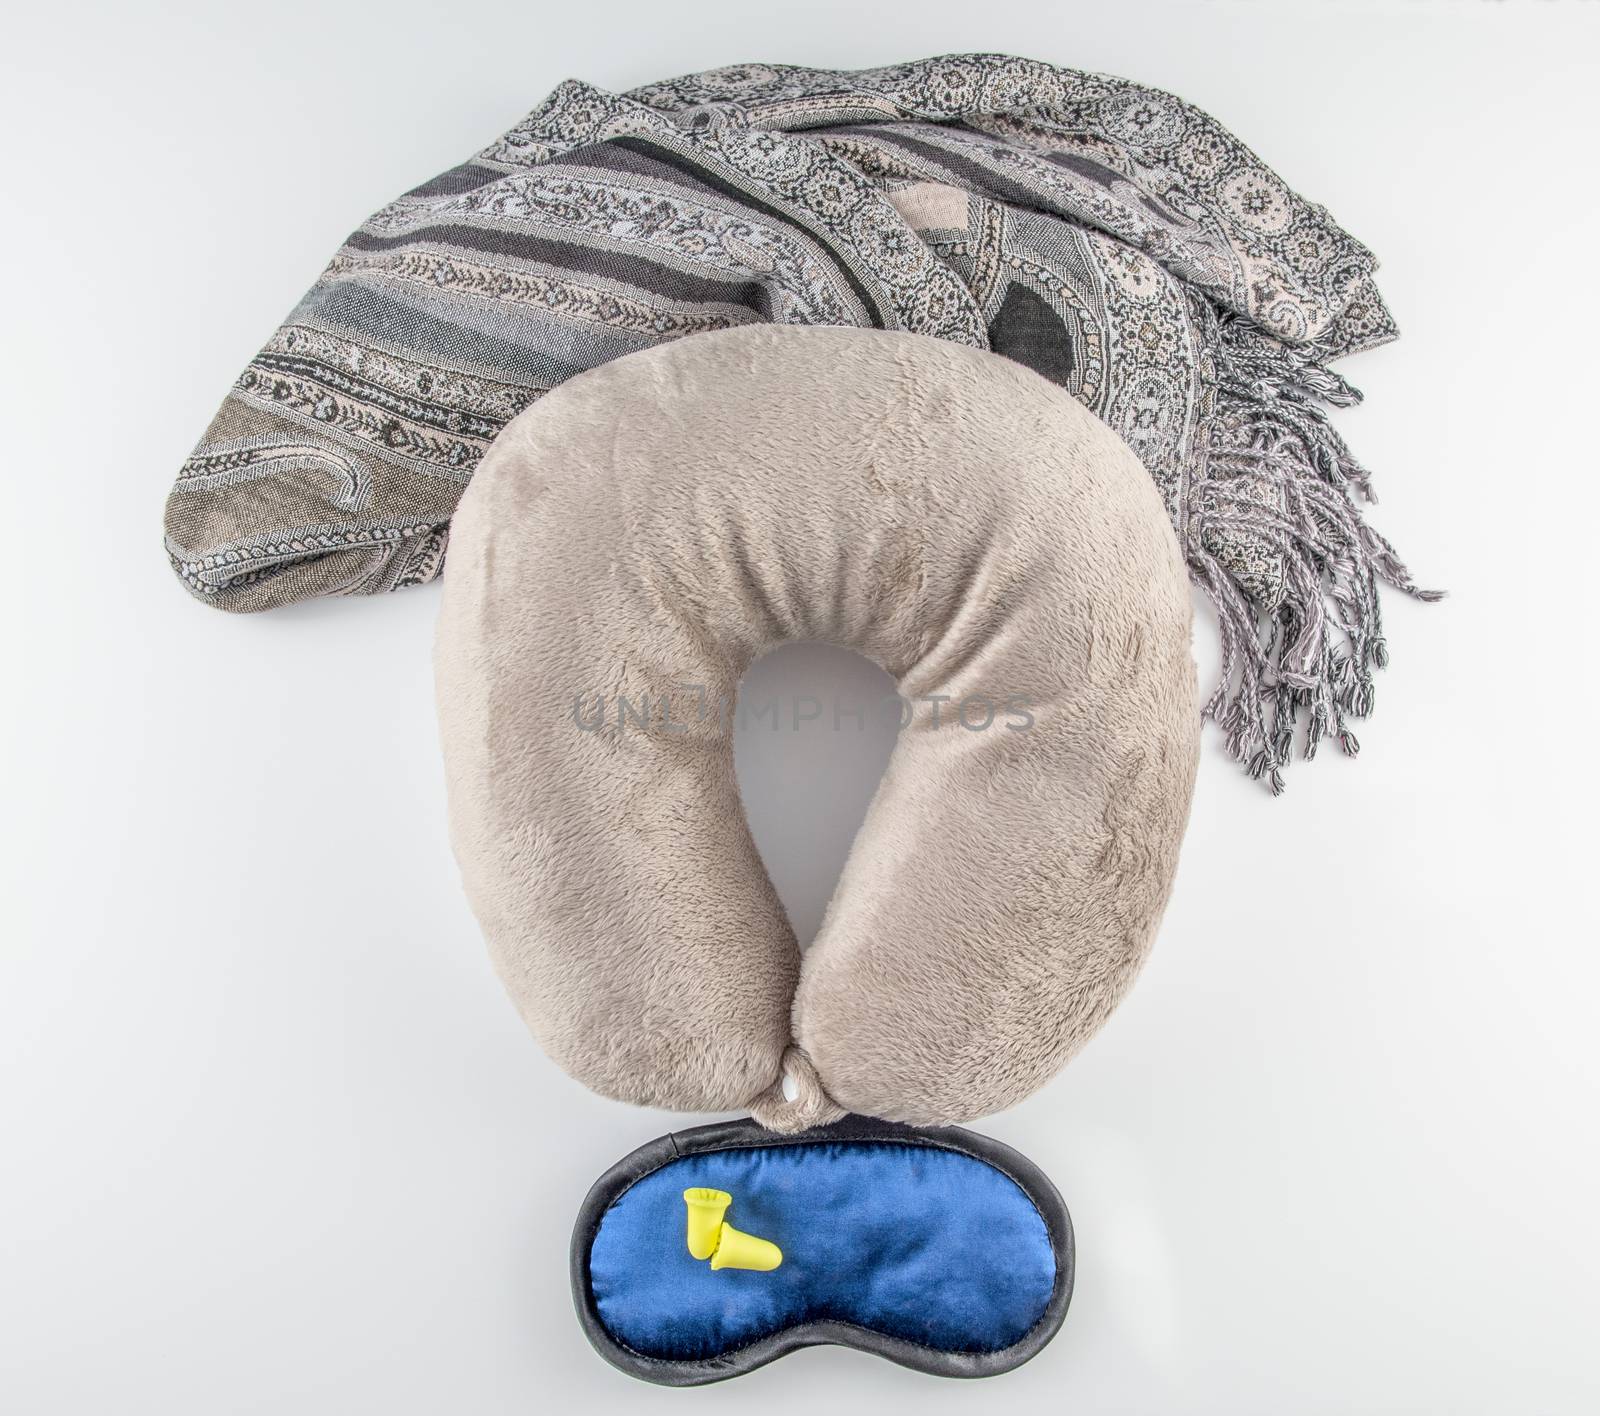 Airplane travel essentials (pillow, scarf/blanket, sleep mask, and ear plugs) on white background